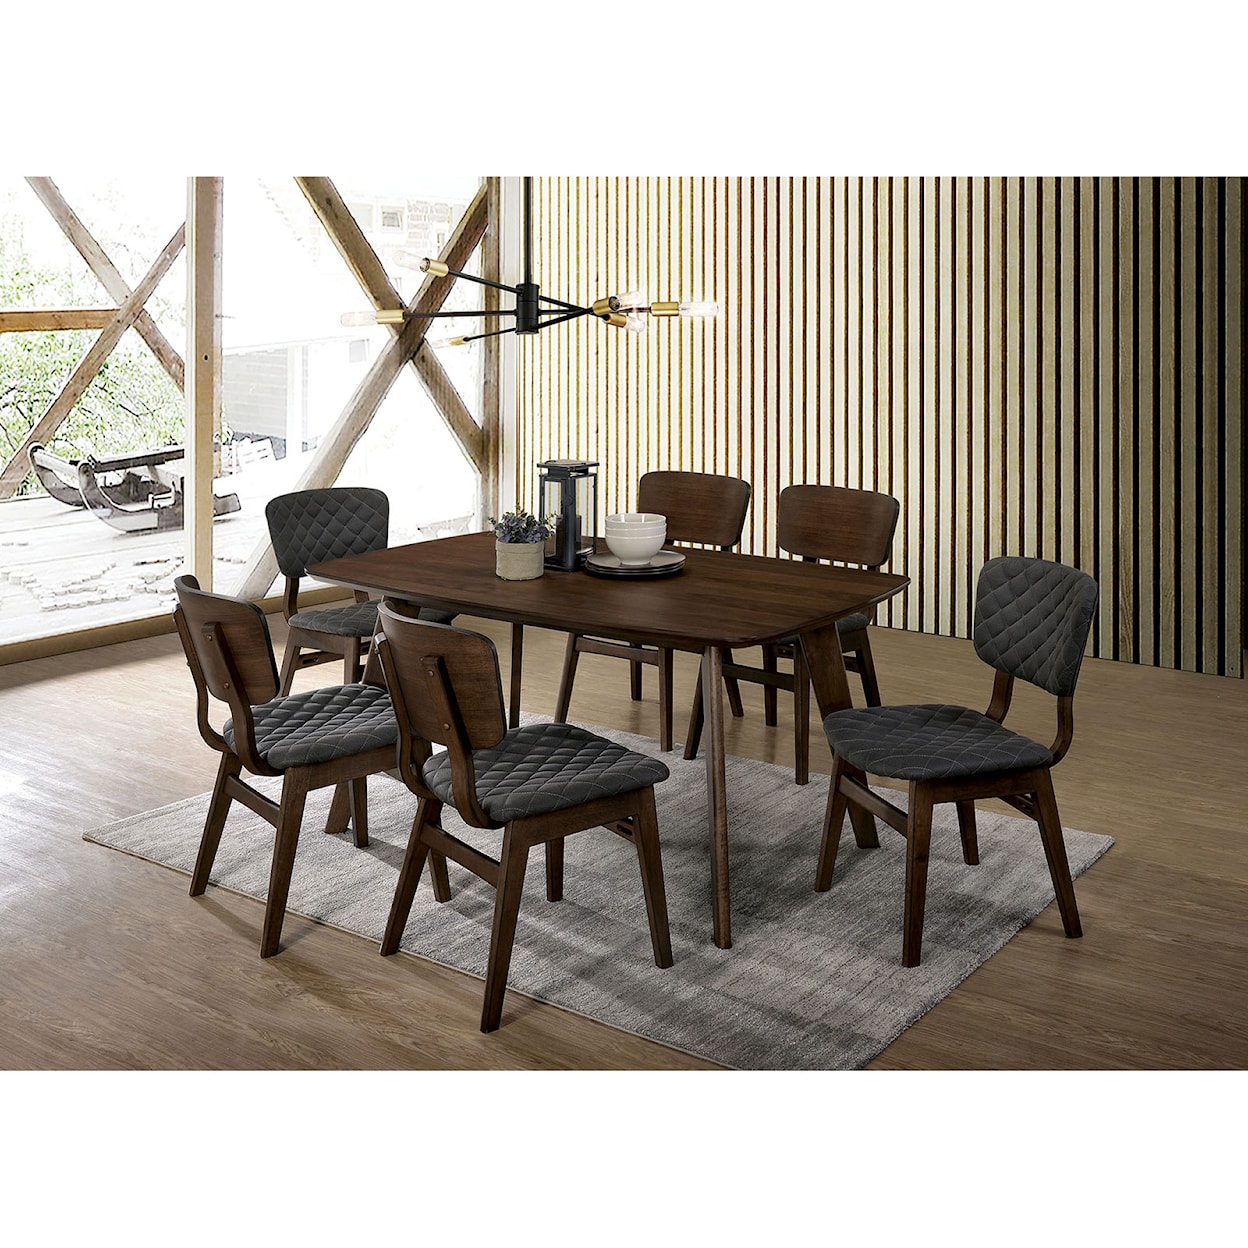 Furniture of America Shayna 7 Piece Dining Table Set